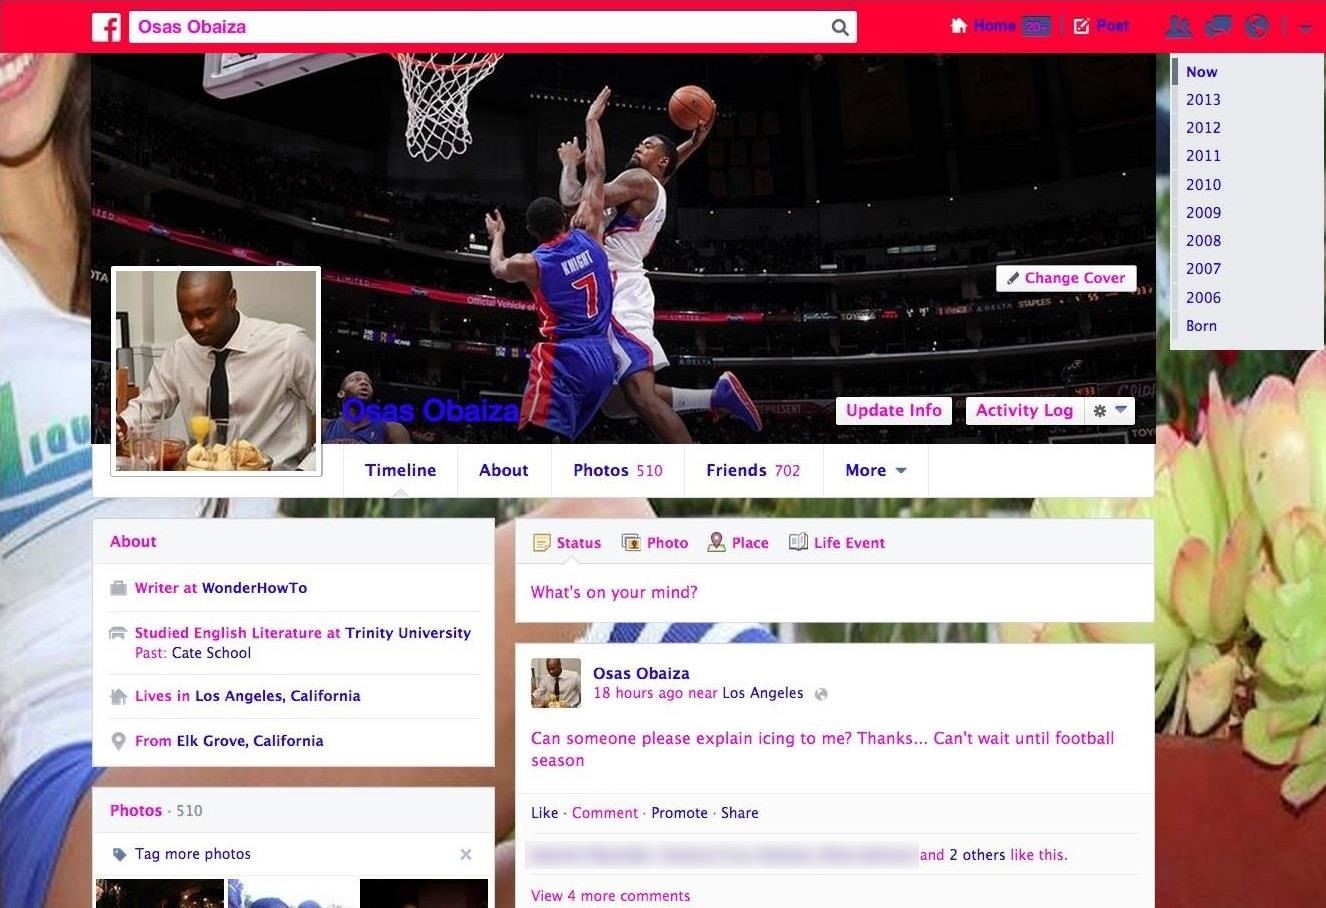 How to Change the Text Color & Default Blue Facebook Theme for a More Swaggy Profile